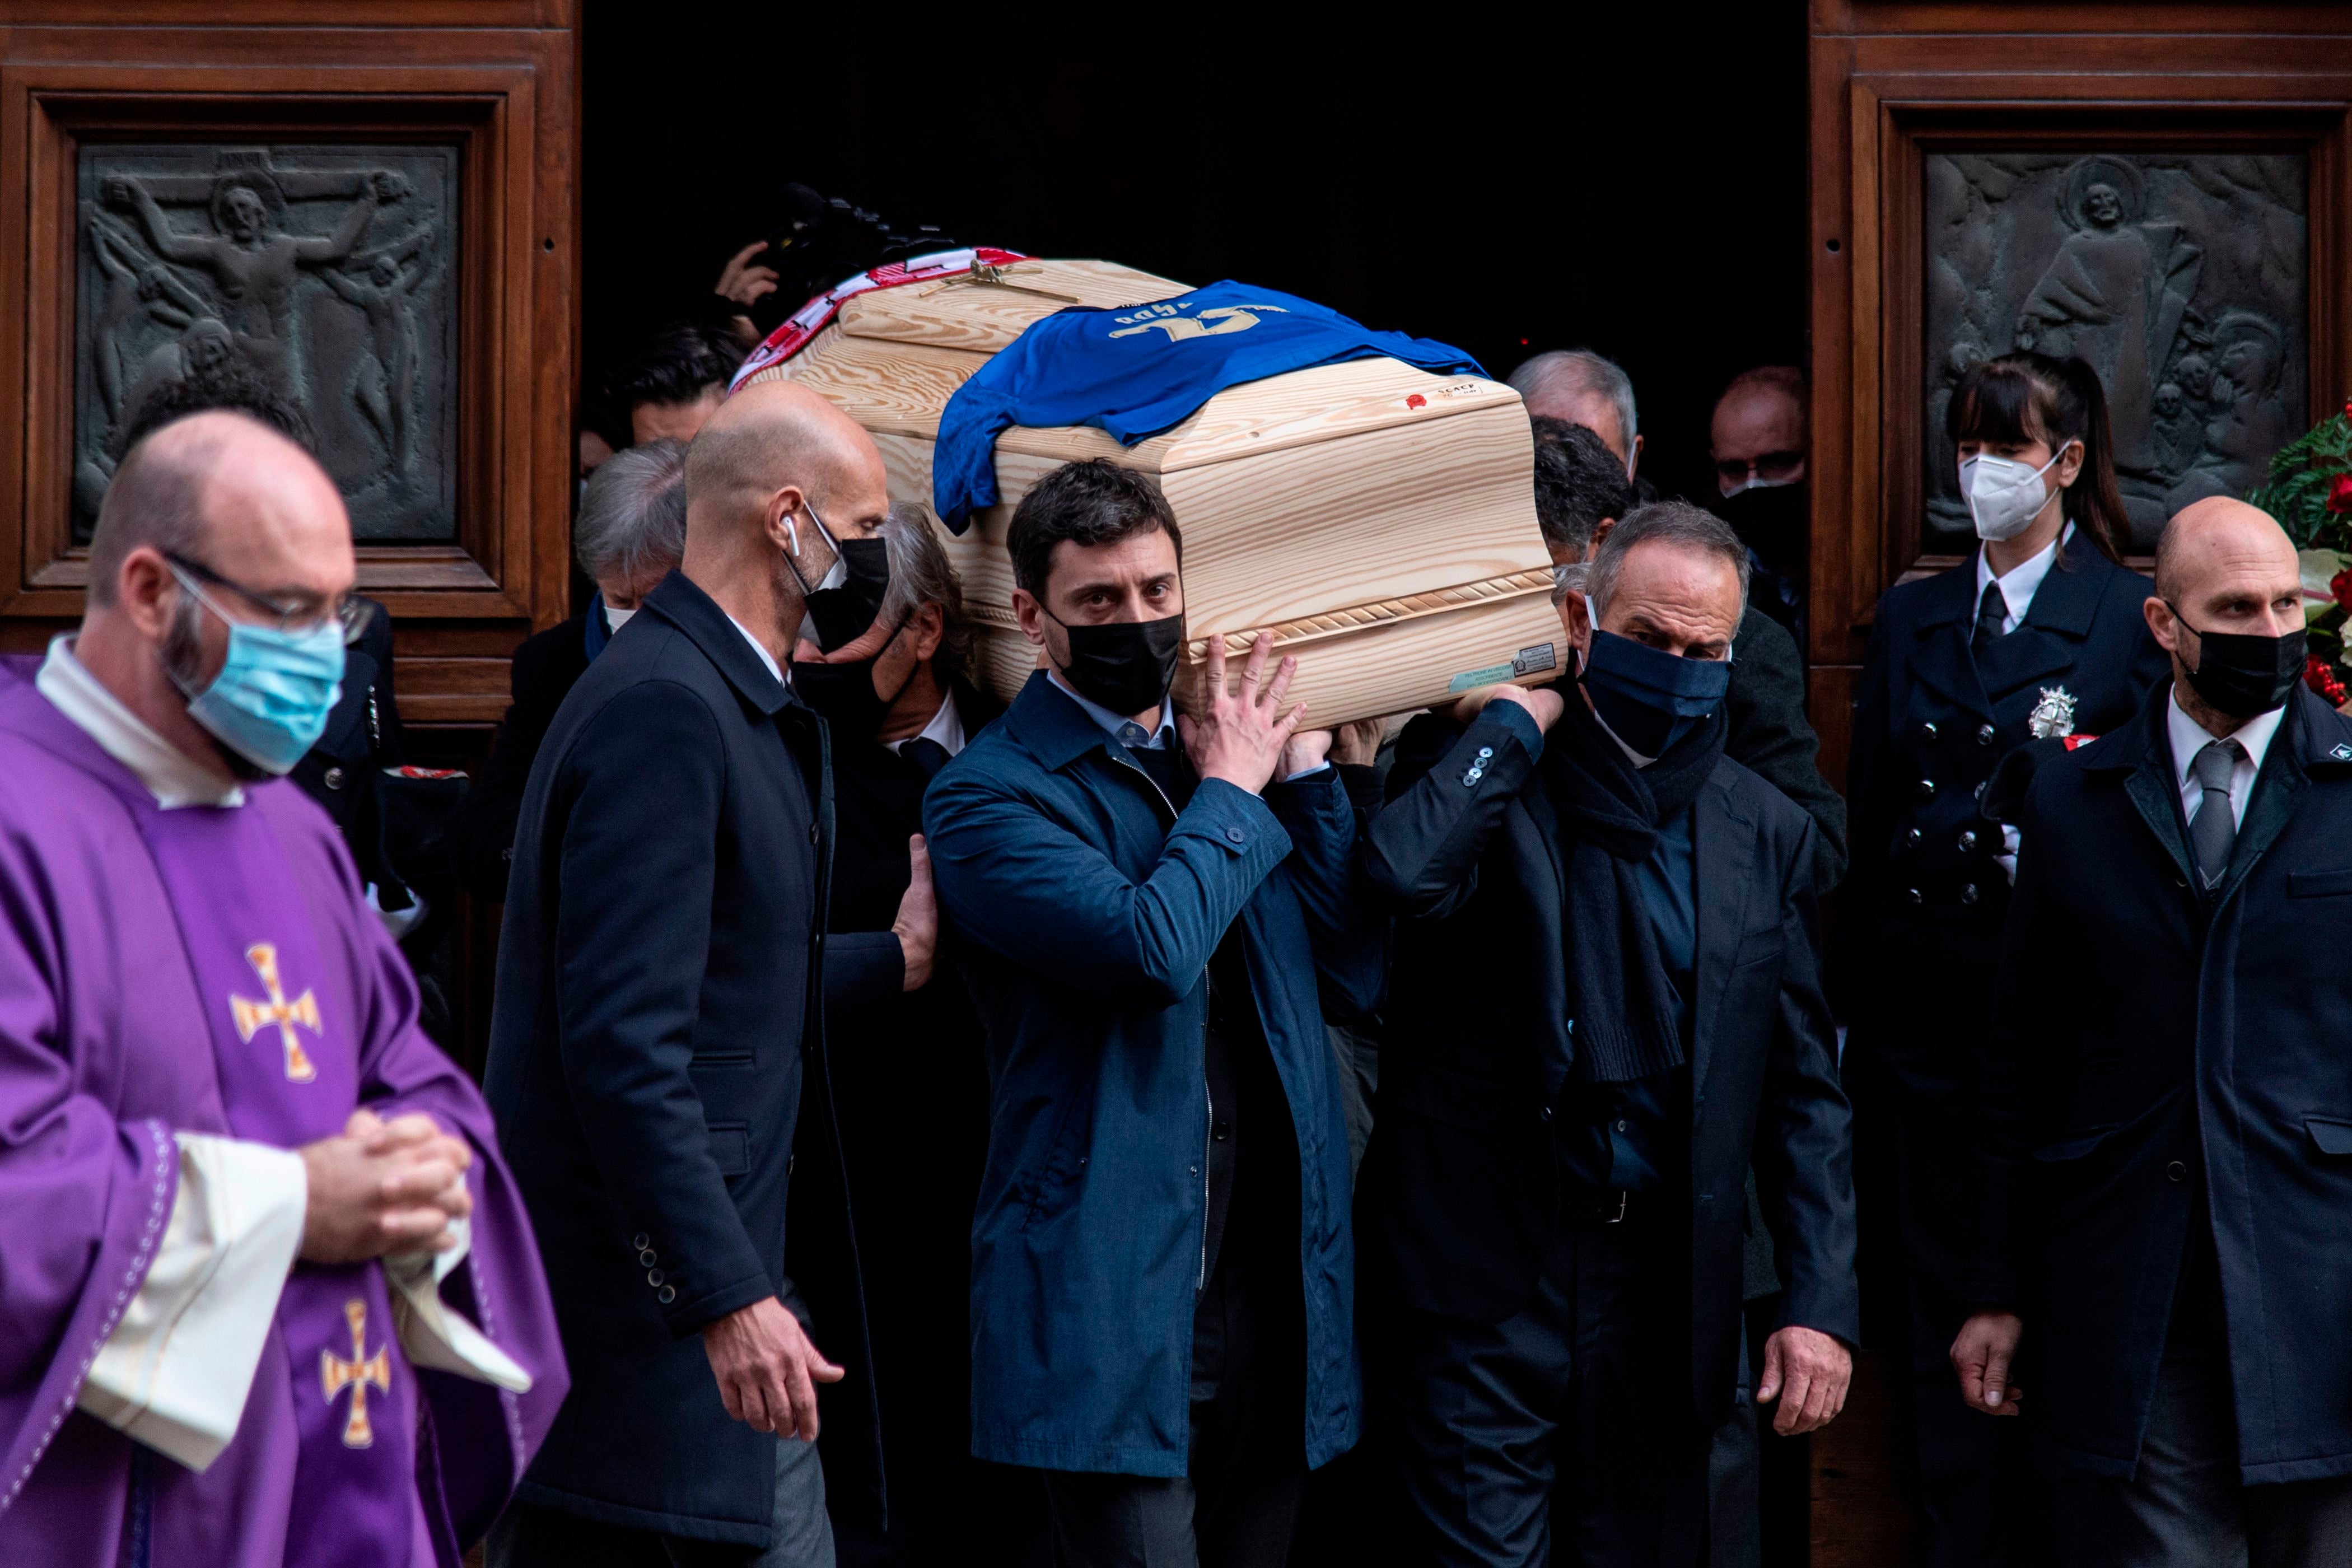 Italy’s former football player Antonio Cabrini (right) and the son of Paolo Rossi, Alessandro Rossi (left), carry the coffin of the late Italian football player during his funeral at the Santa Maria Annunciata Cathedral in Vicenza, northeastern Italy, on December 12, 2020. The footballer’s home was reportedly burgled while his family was away at the service.